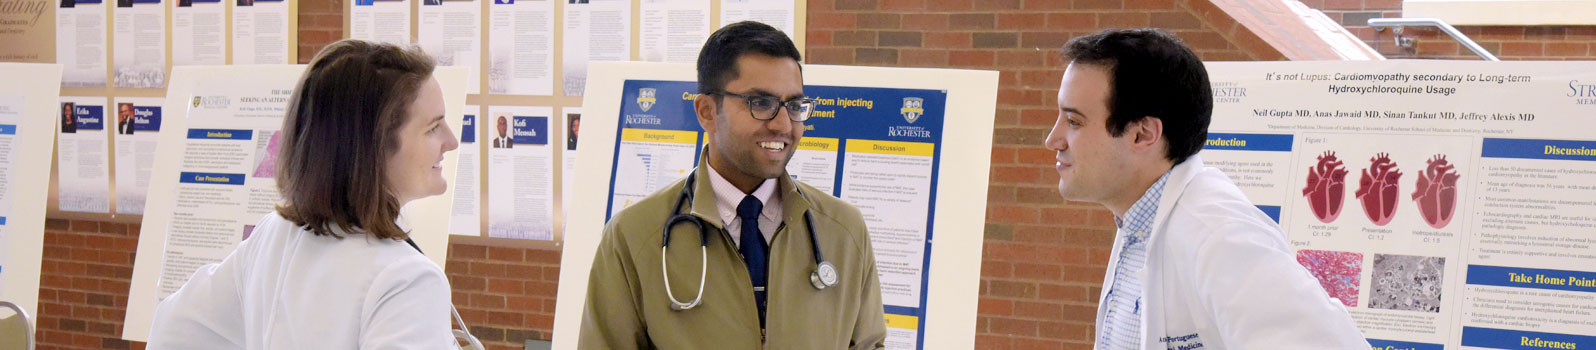 Residents discuss their latest clinical endeavors at Resident Poster Day